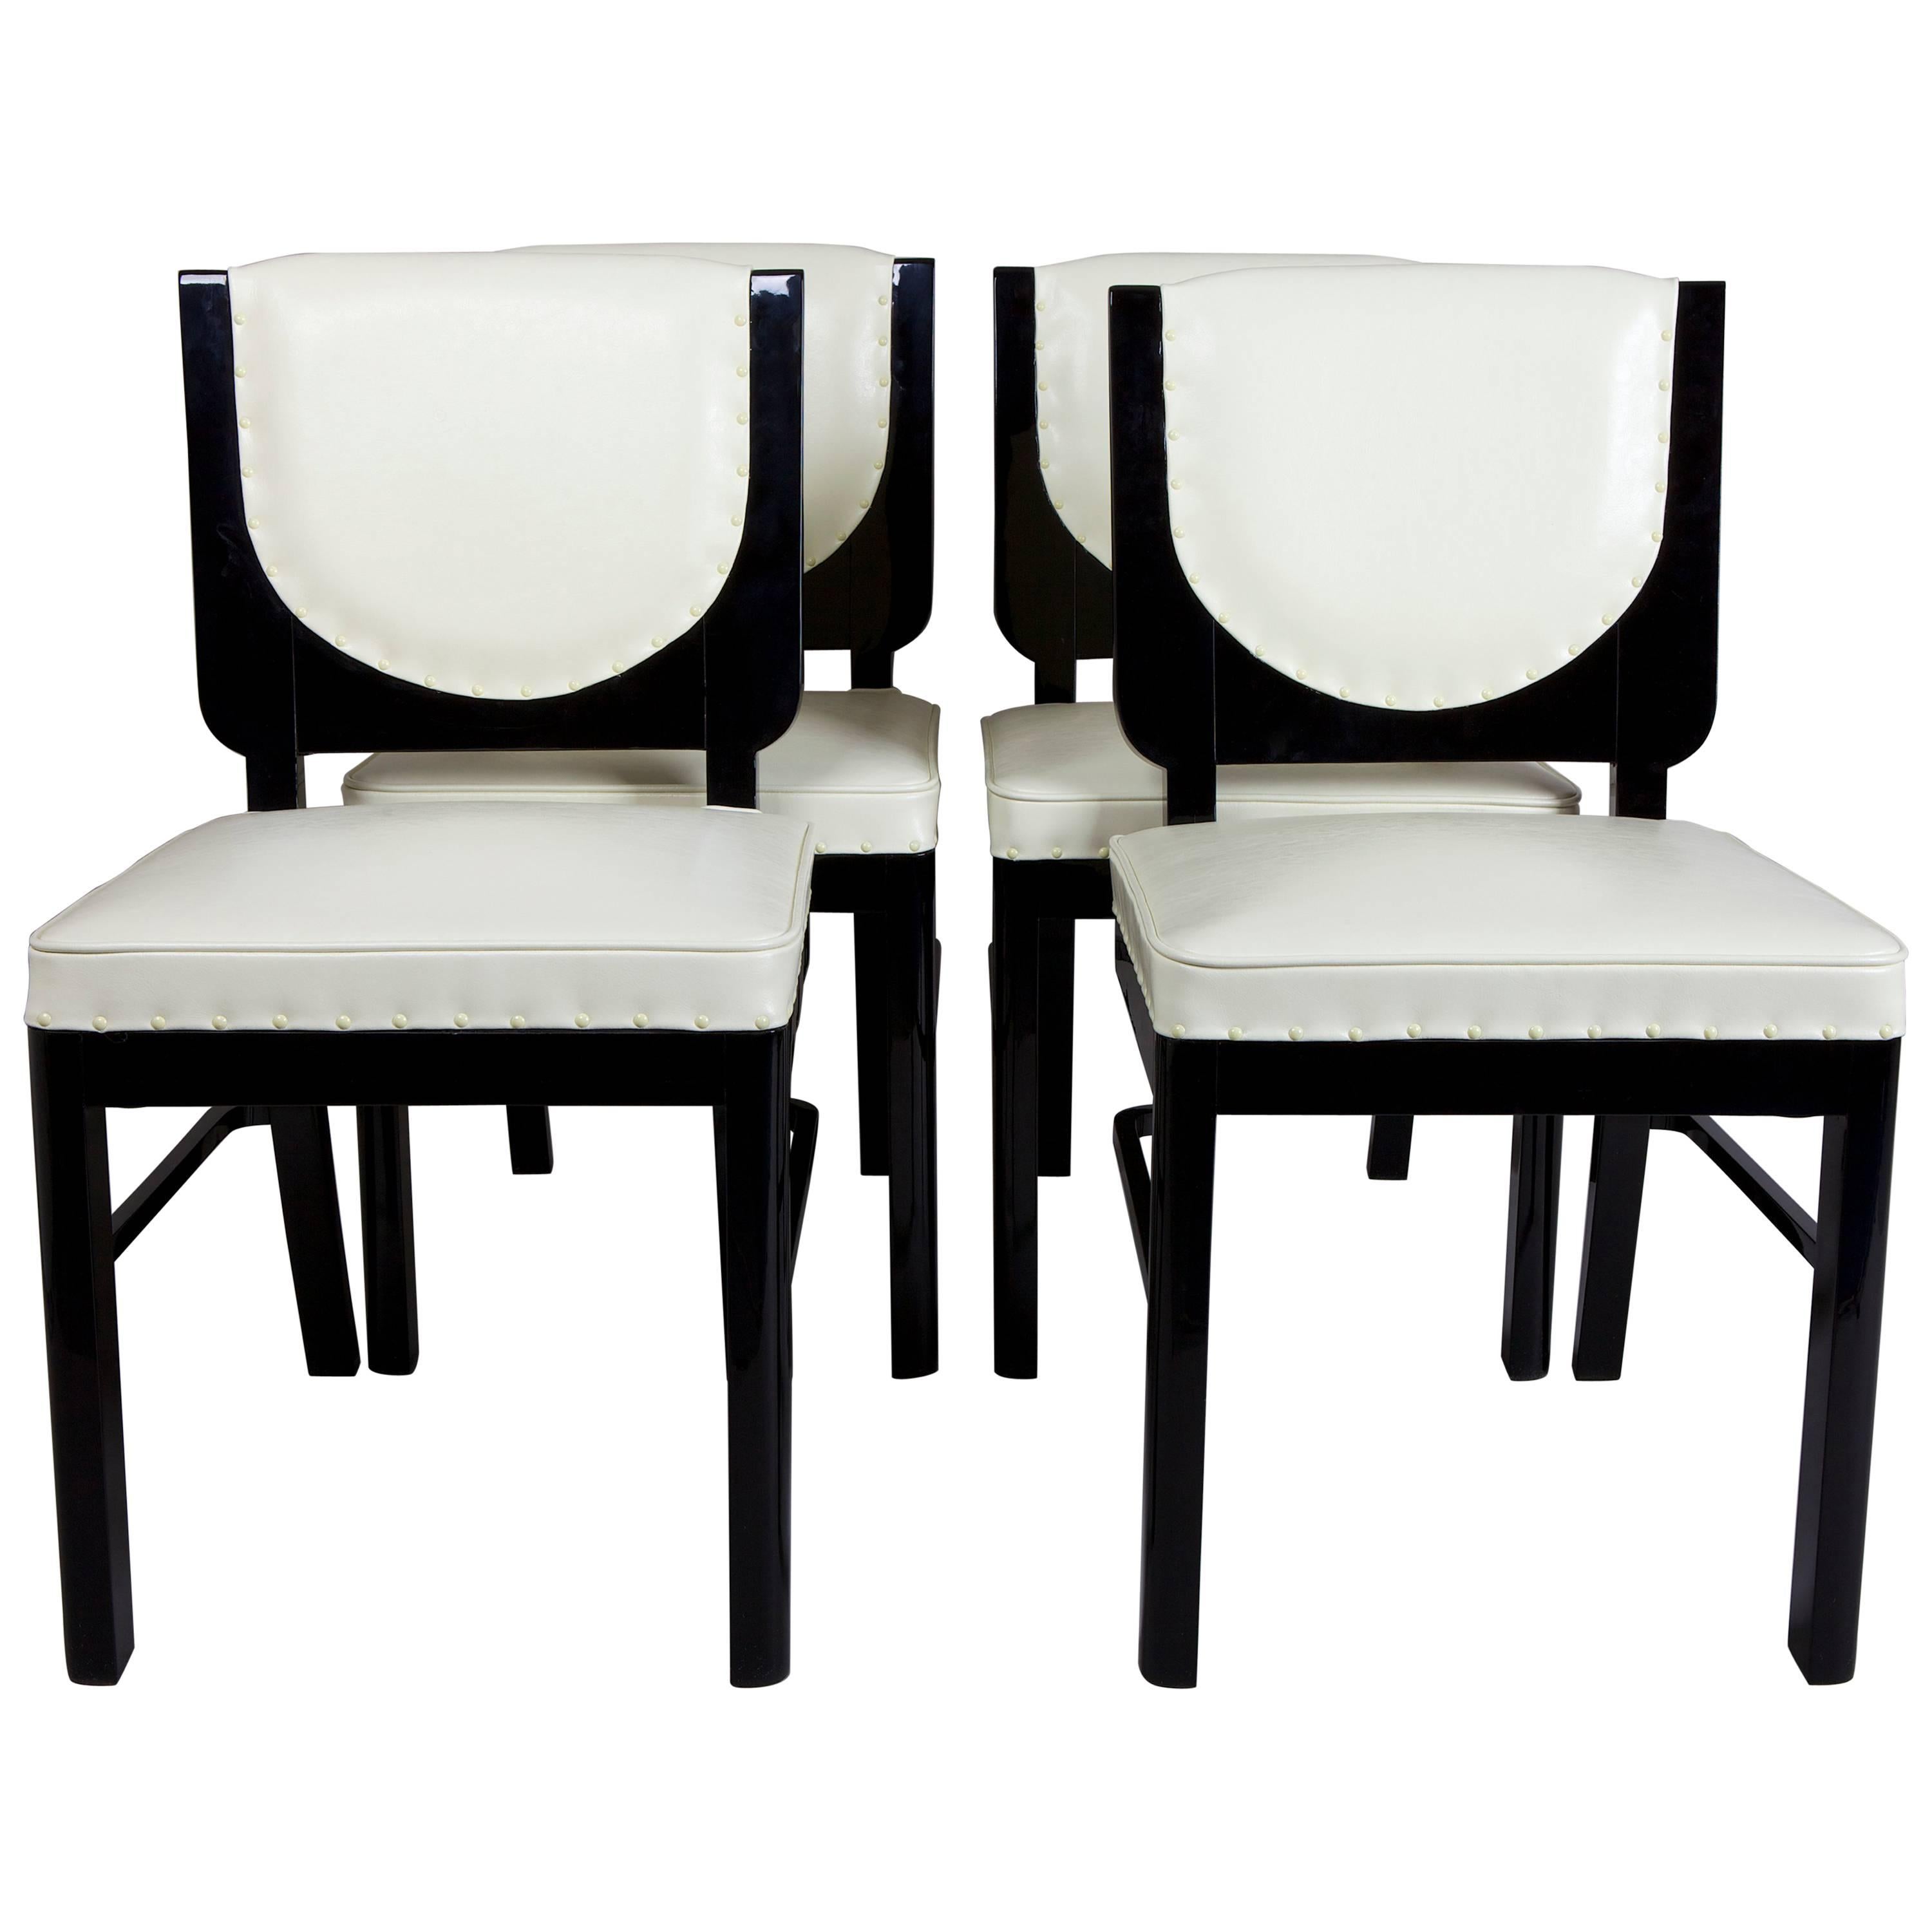 Completely restored ArtDeco French Ebony Set of Chairs, 4 pcs, Period: 1920-1929